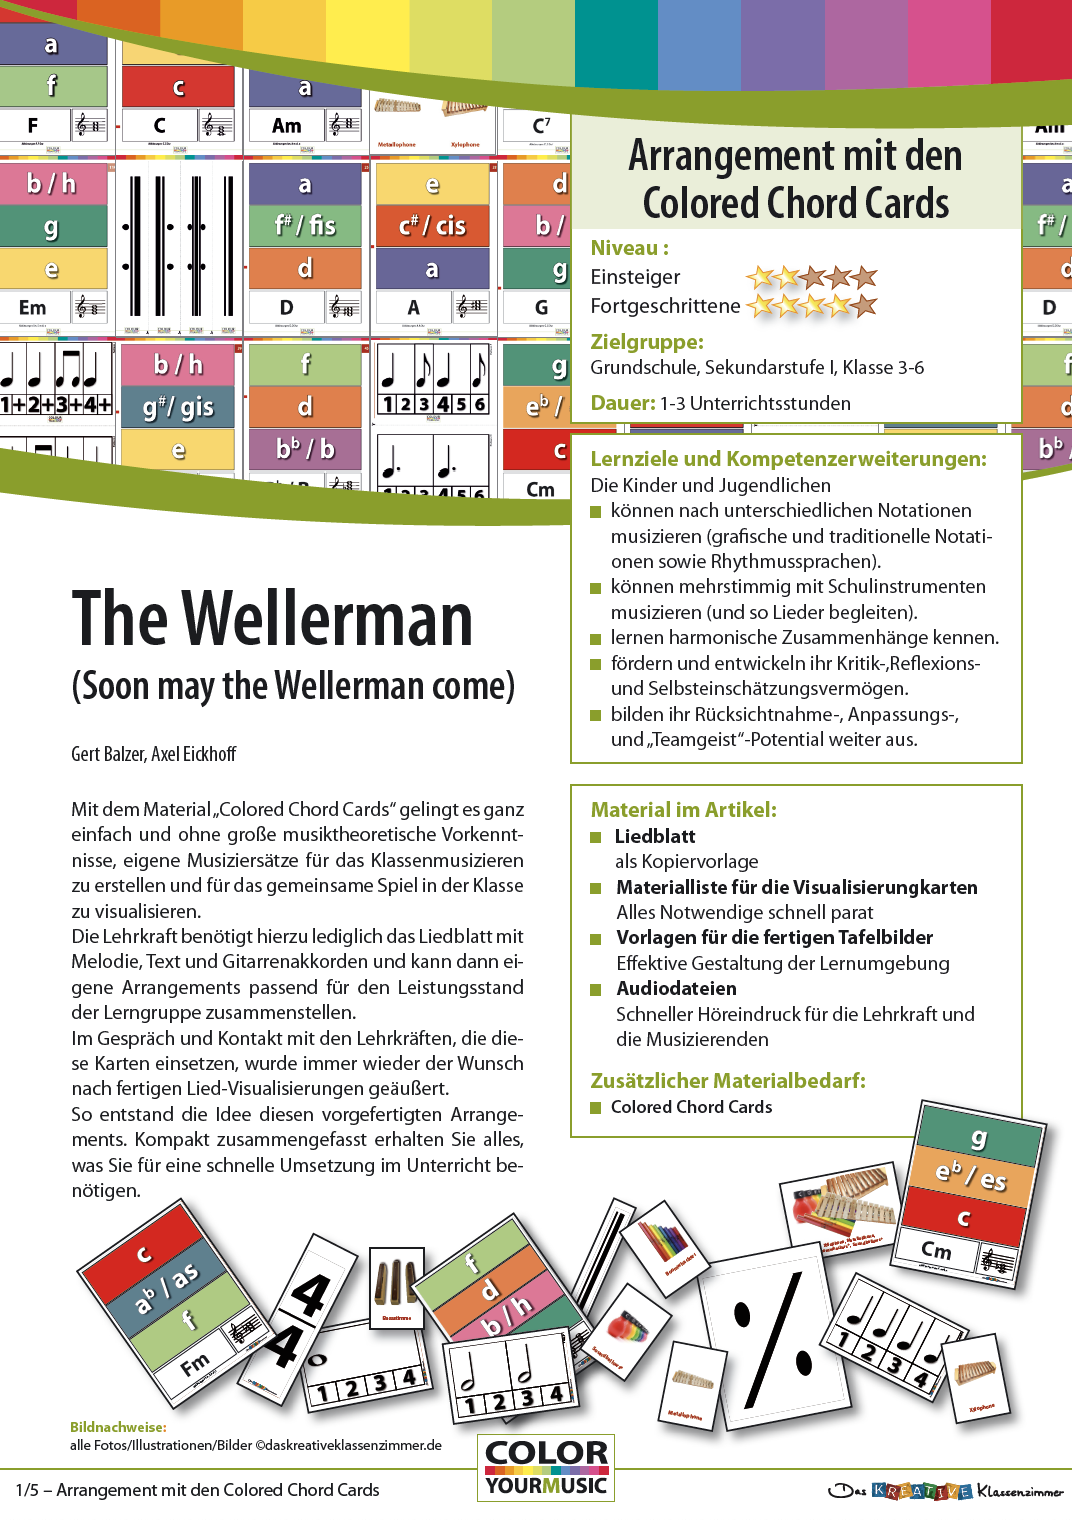 The Wellerman (Soon may the Wellerman come)- Colored Chord Cards